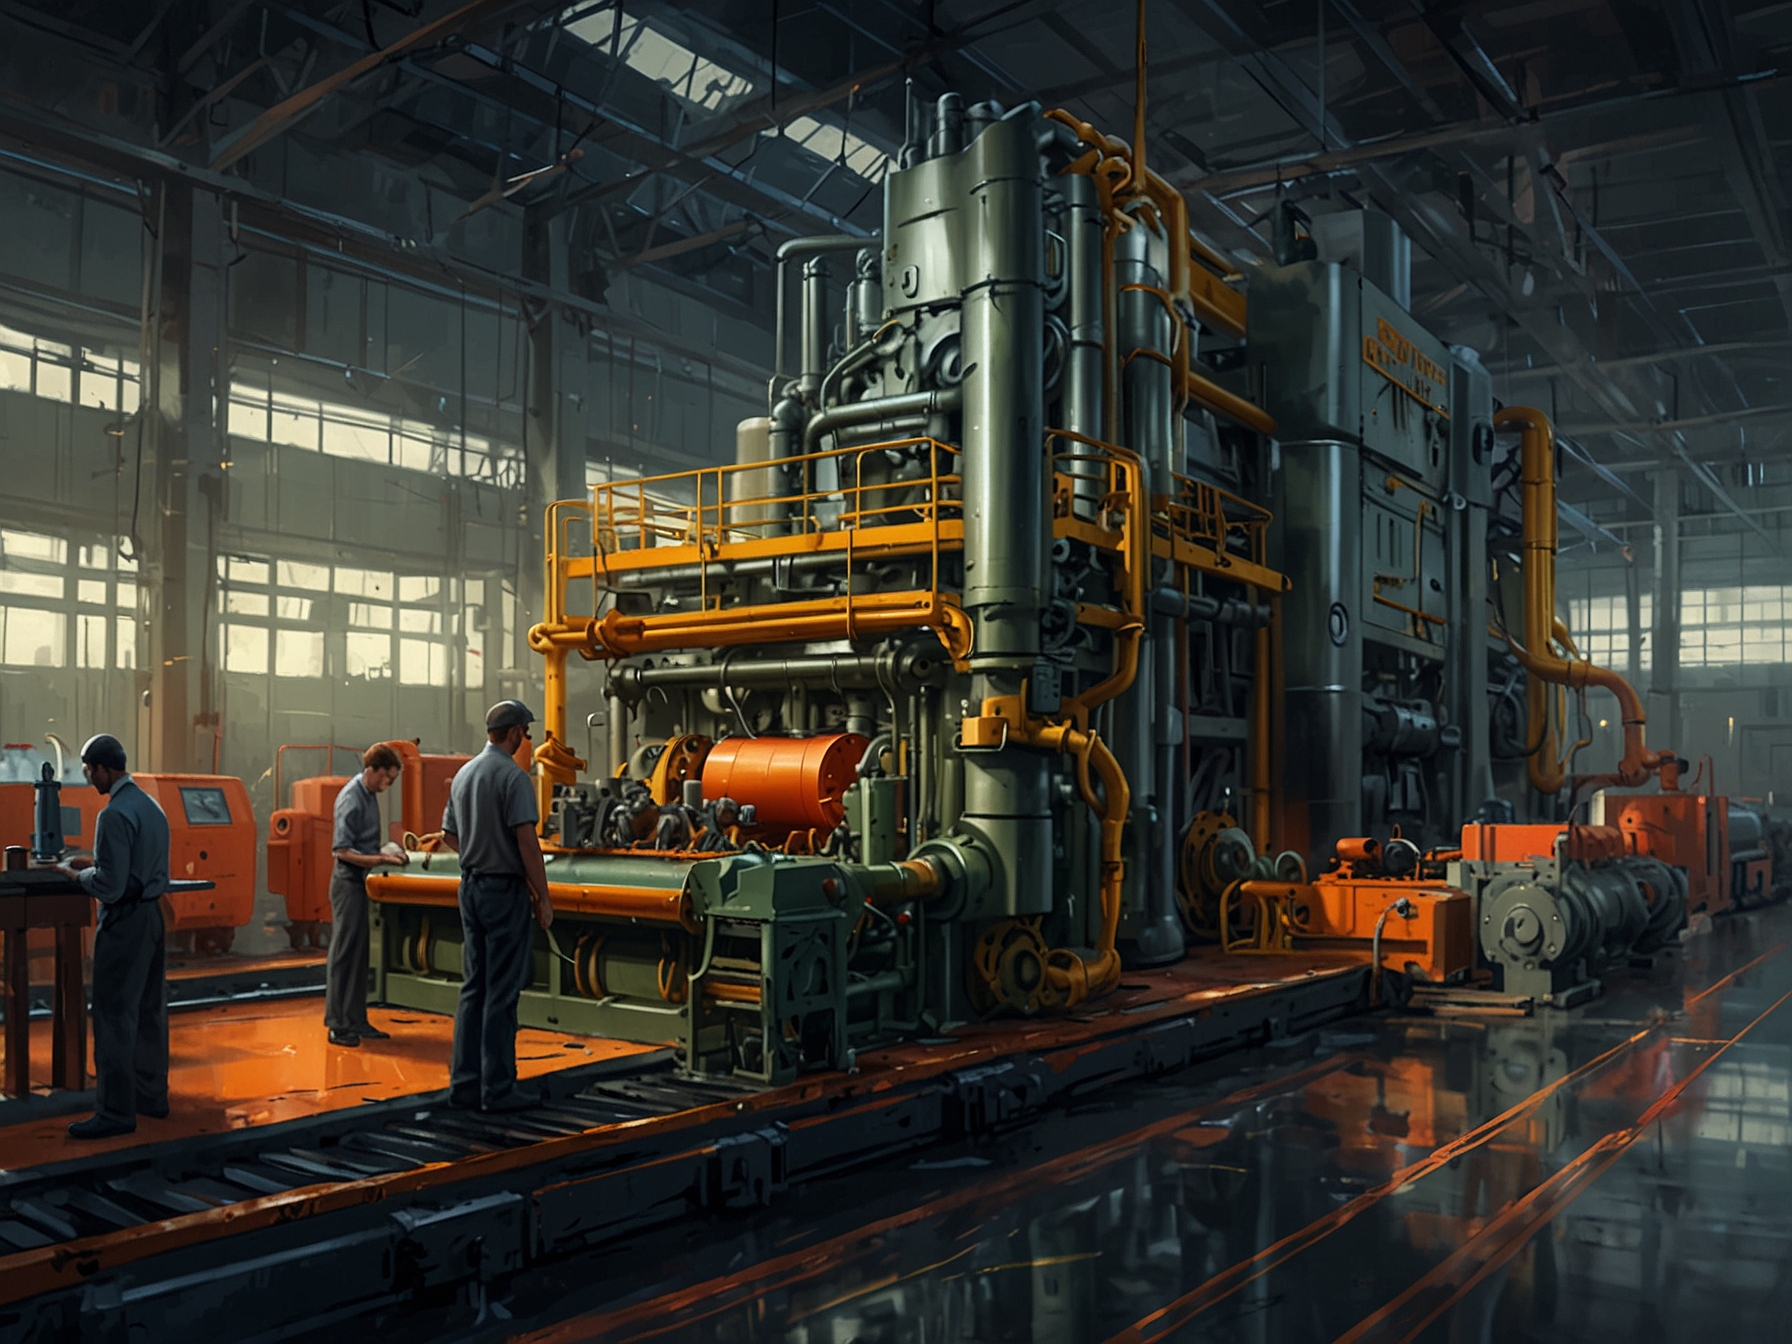 An image of a manufacturing plant with advanced machinery, showcasing the integration of automation and technology which Miles Roberts emphasizes as crucial for future success.